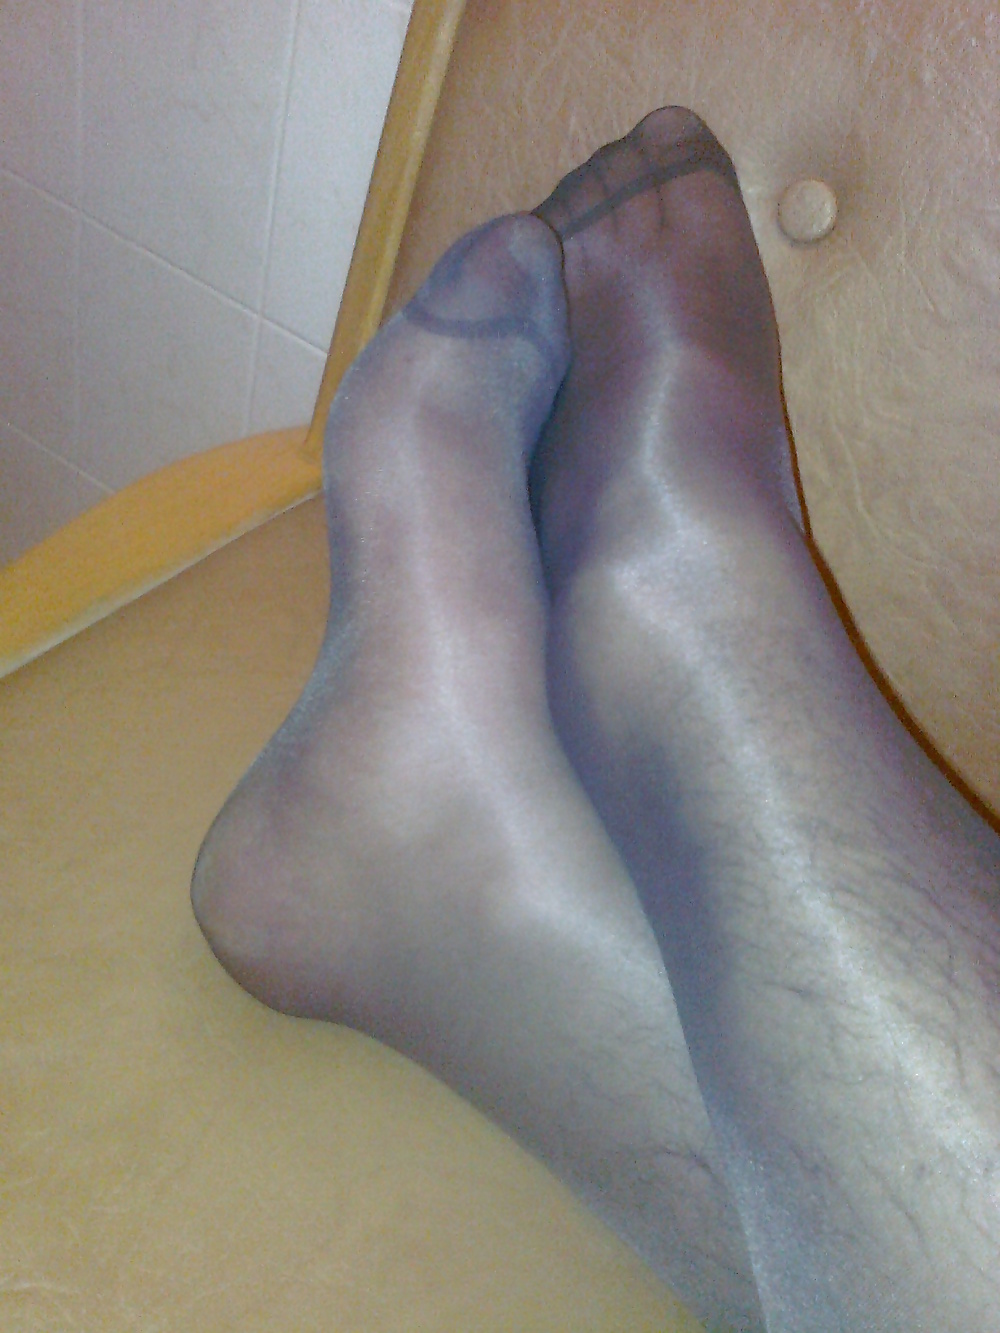 Stocking and feet #25191773